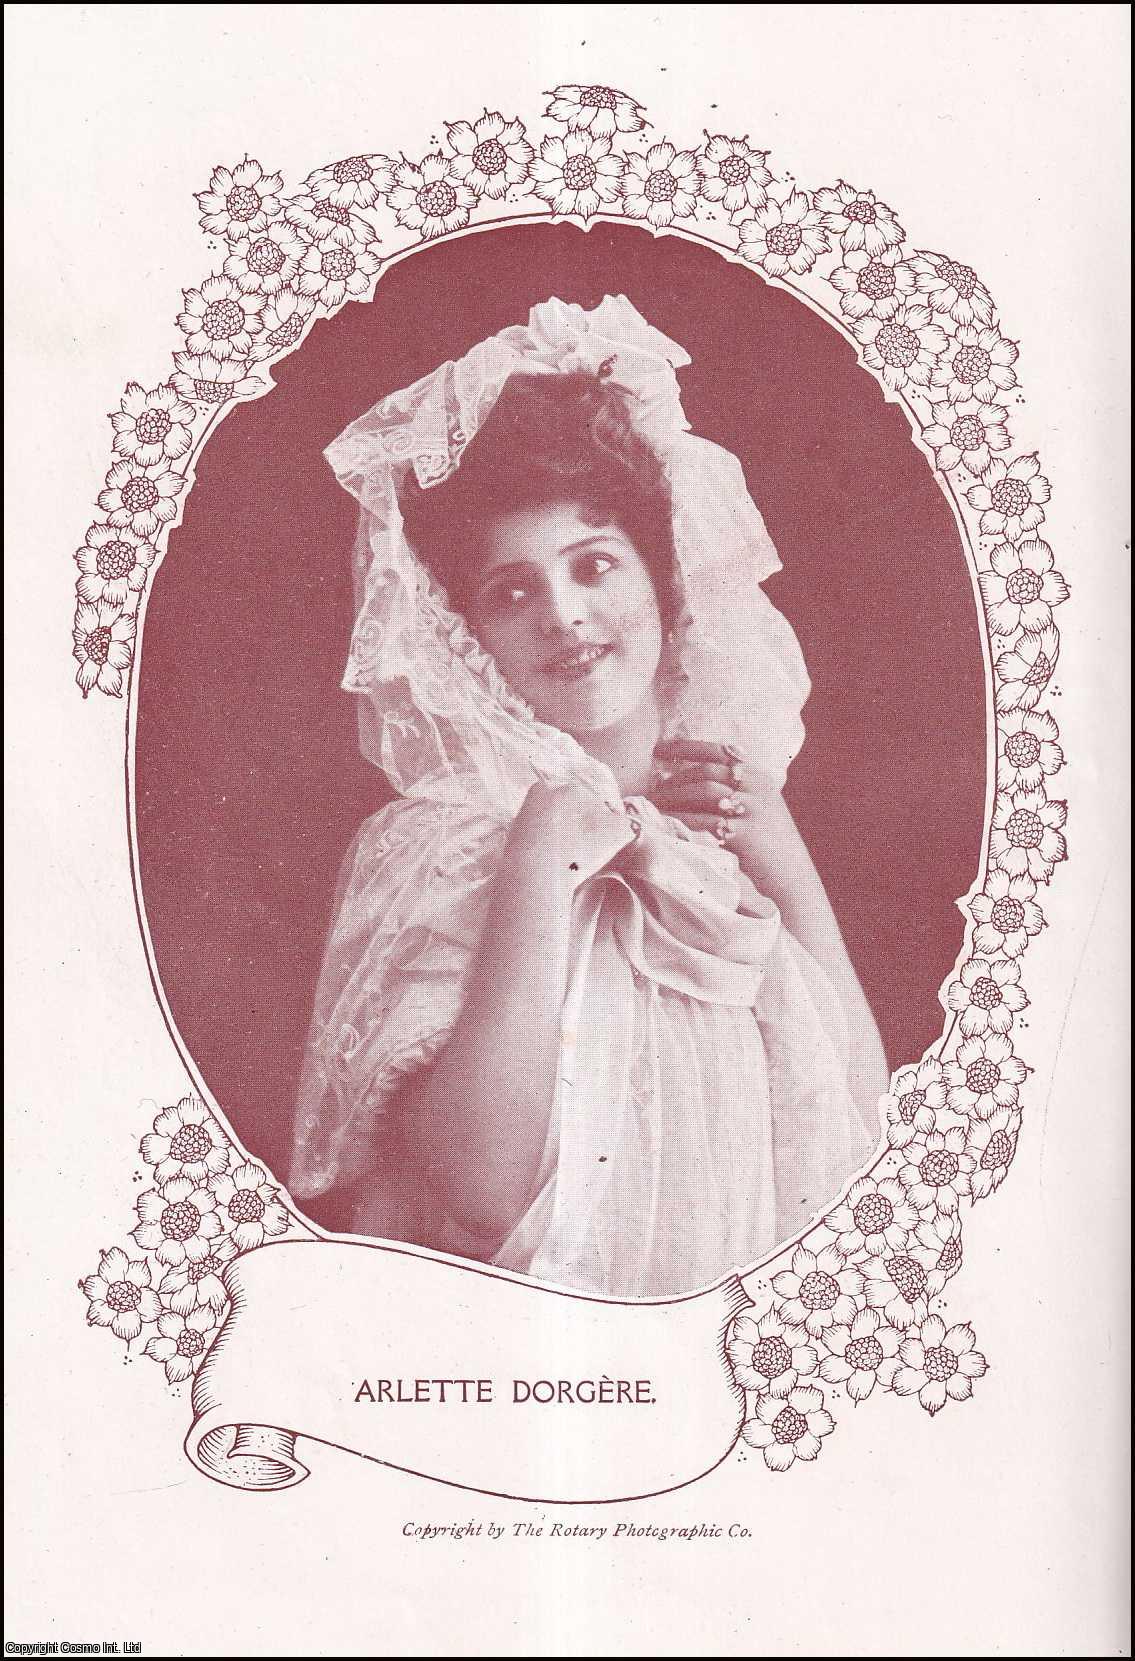 No Author Stated - The World's most Beautiful Women : Lina Cavalieri ; Arlette Dorgere ; Marie Labounskaya ; Gabrielle Ray ; Maxine Elliott ; Maria Guerrero ; Emmy Wehlen & Sanyada. An uncommon original article from The Strand Magazine, 1908.